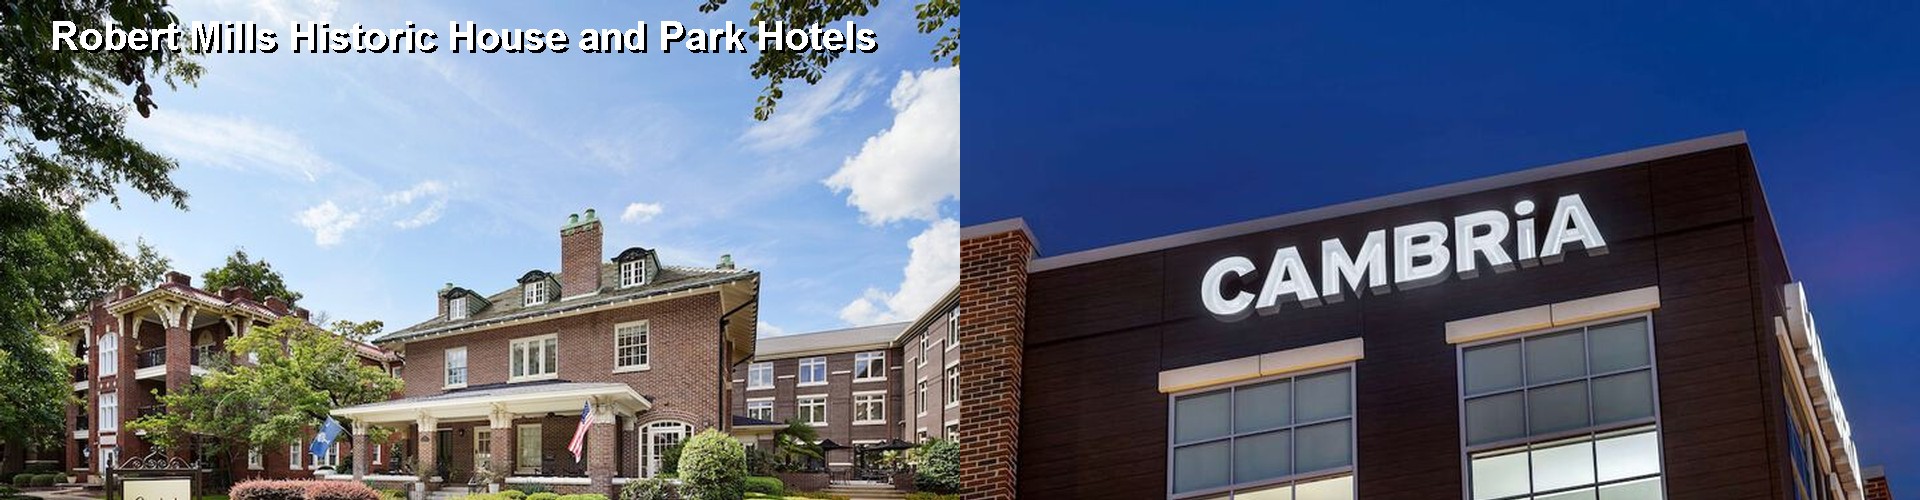 4 Best Hotels near Robert Mills Historic House and Park